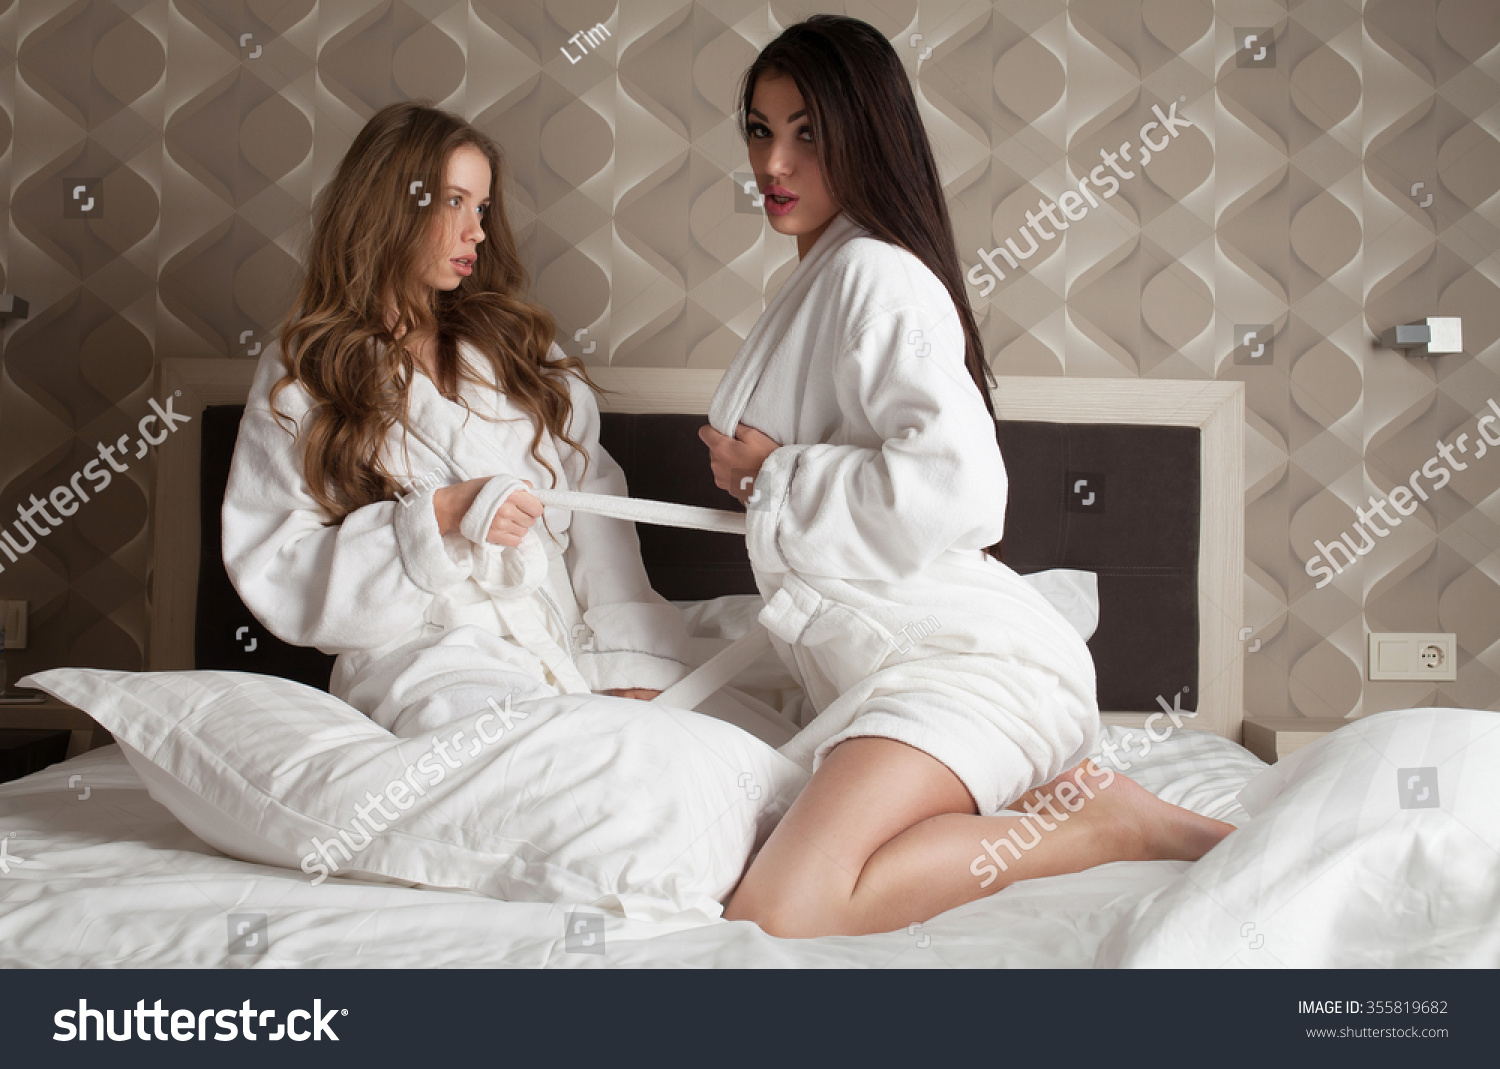 289 Brunette Blonde Fight Stock Photos, Images & Pictures